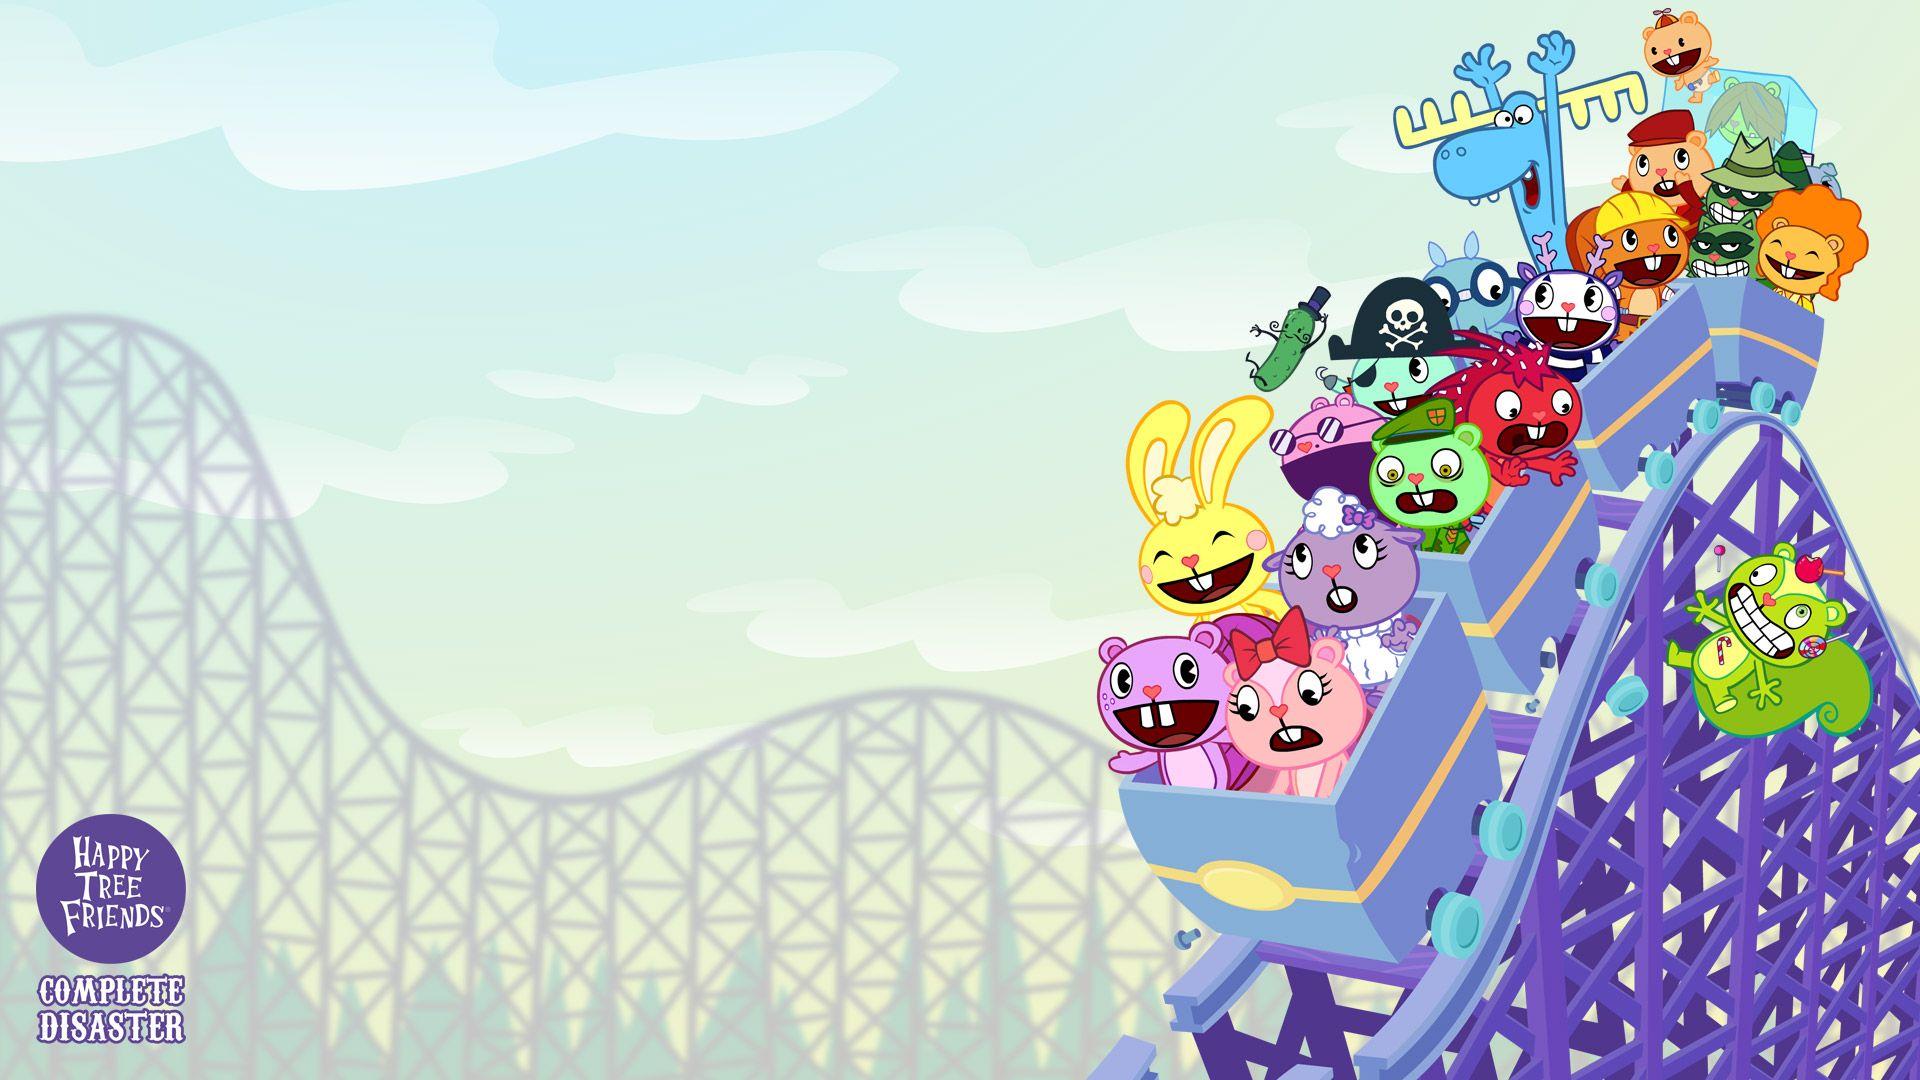 Happy Tree Friends: Complete Disaster Wallpaper Tree